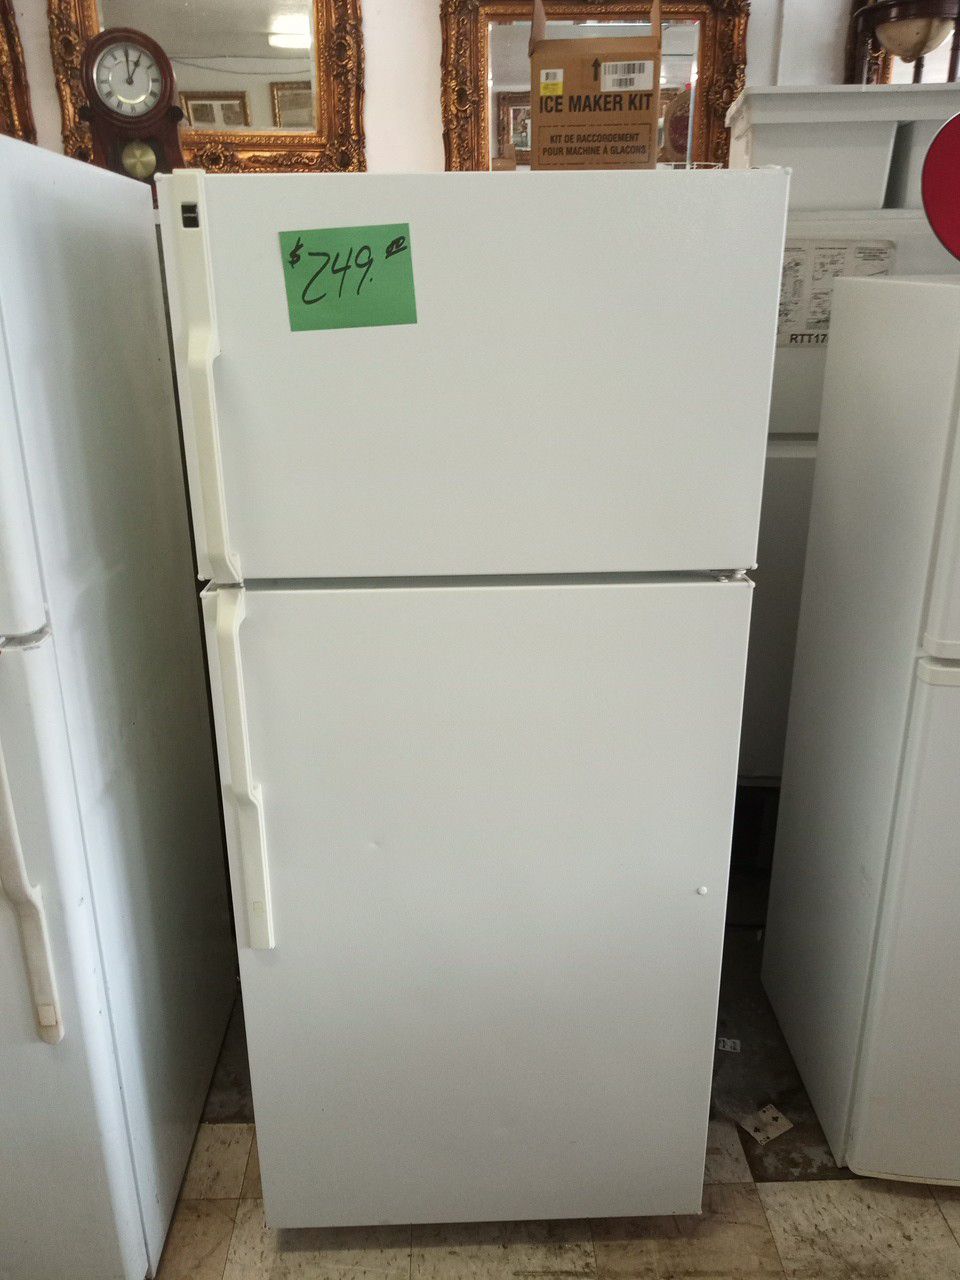 Hotpoint Refrigerator white excellent . Warranty , Delivery available 2203 Fowler st. Ft. Myers 33901